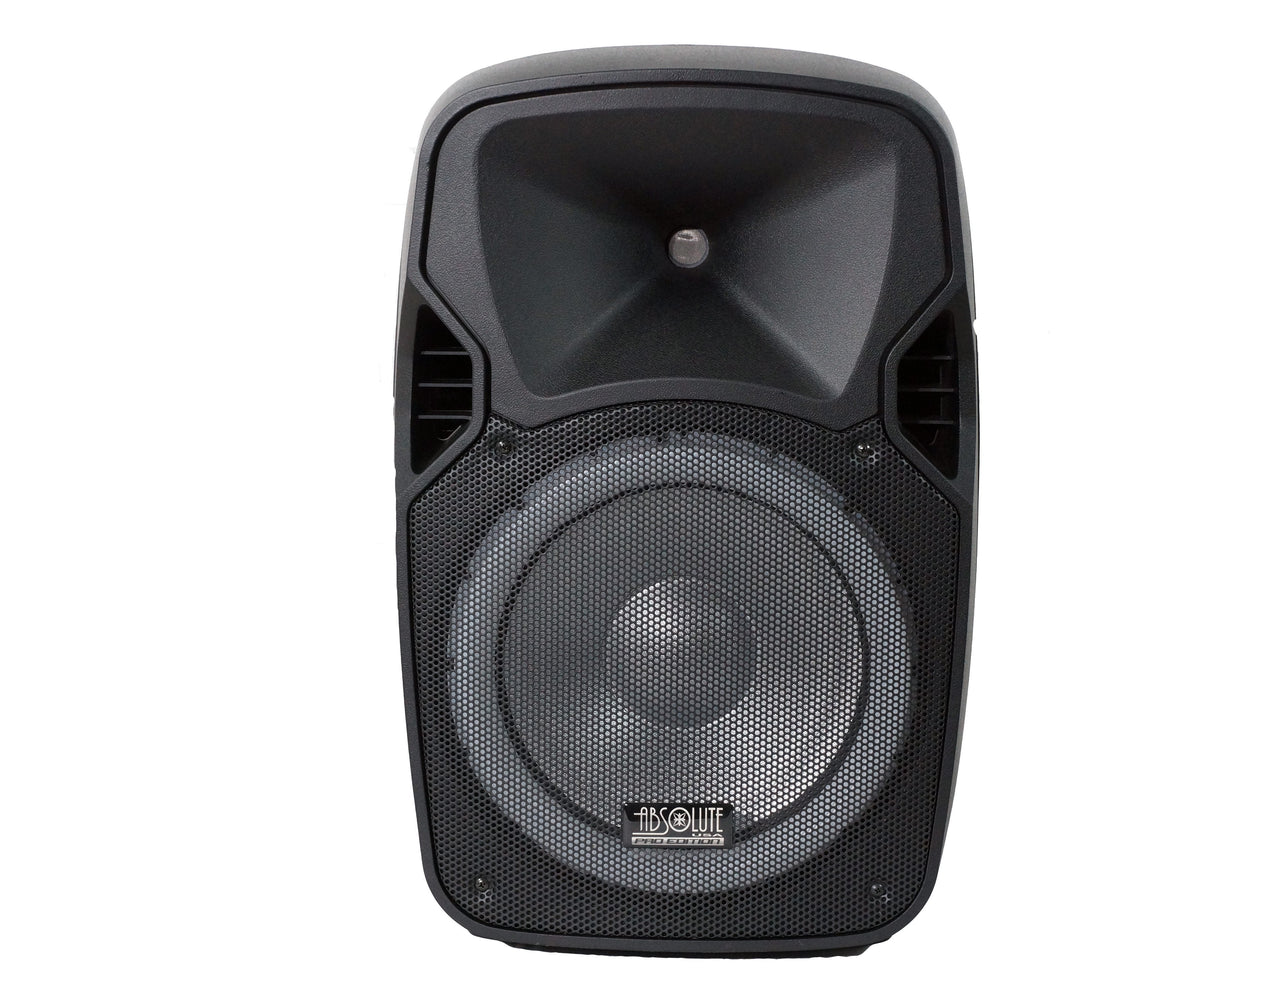 USPROBAT12 12" Speaker PA System Wireless Mic Bluetooth Rechargeable + Stand